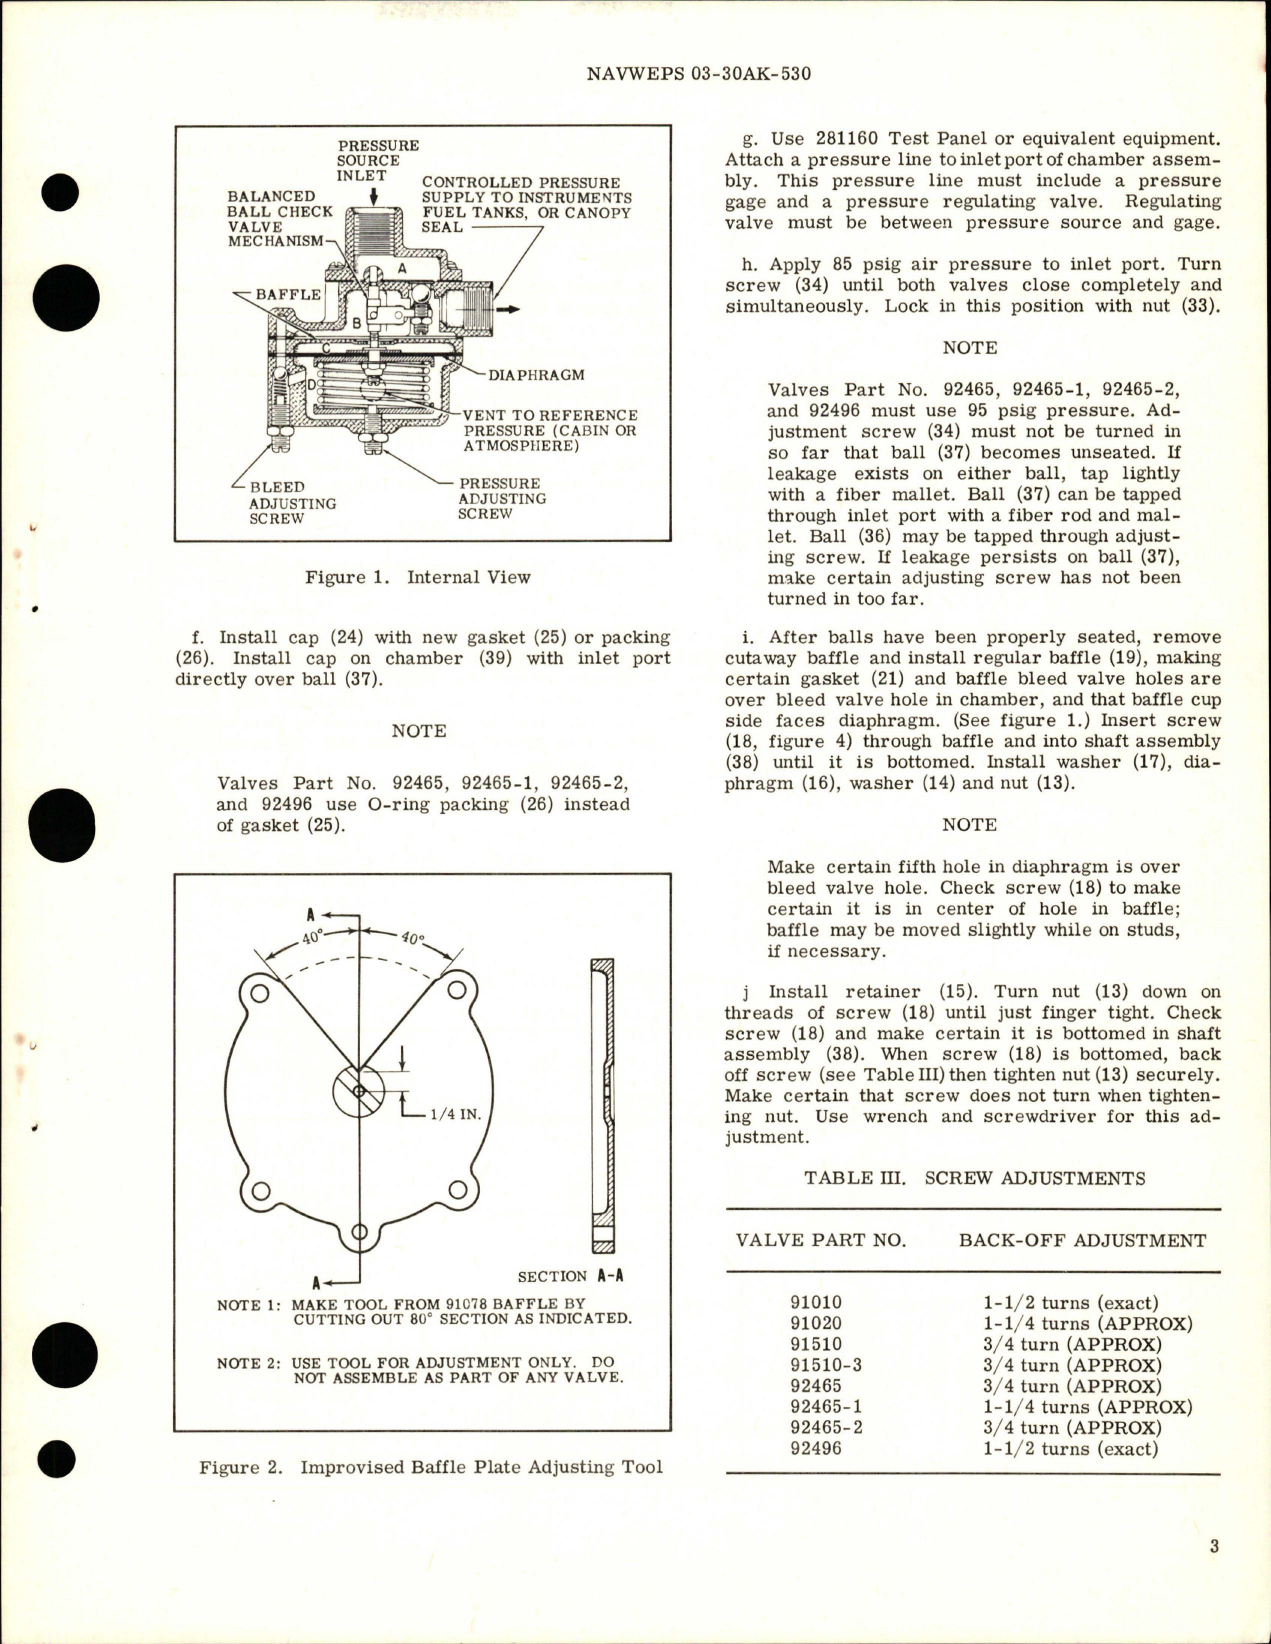 Sample page 5 from AirCorps Library document: Overhaul Instructions with Parts Breakdown for Air Pressure Control Valves